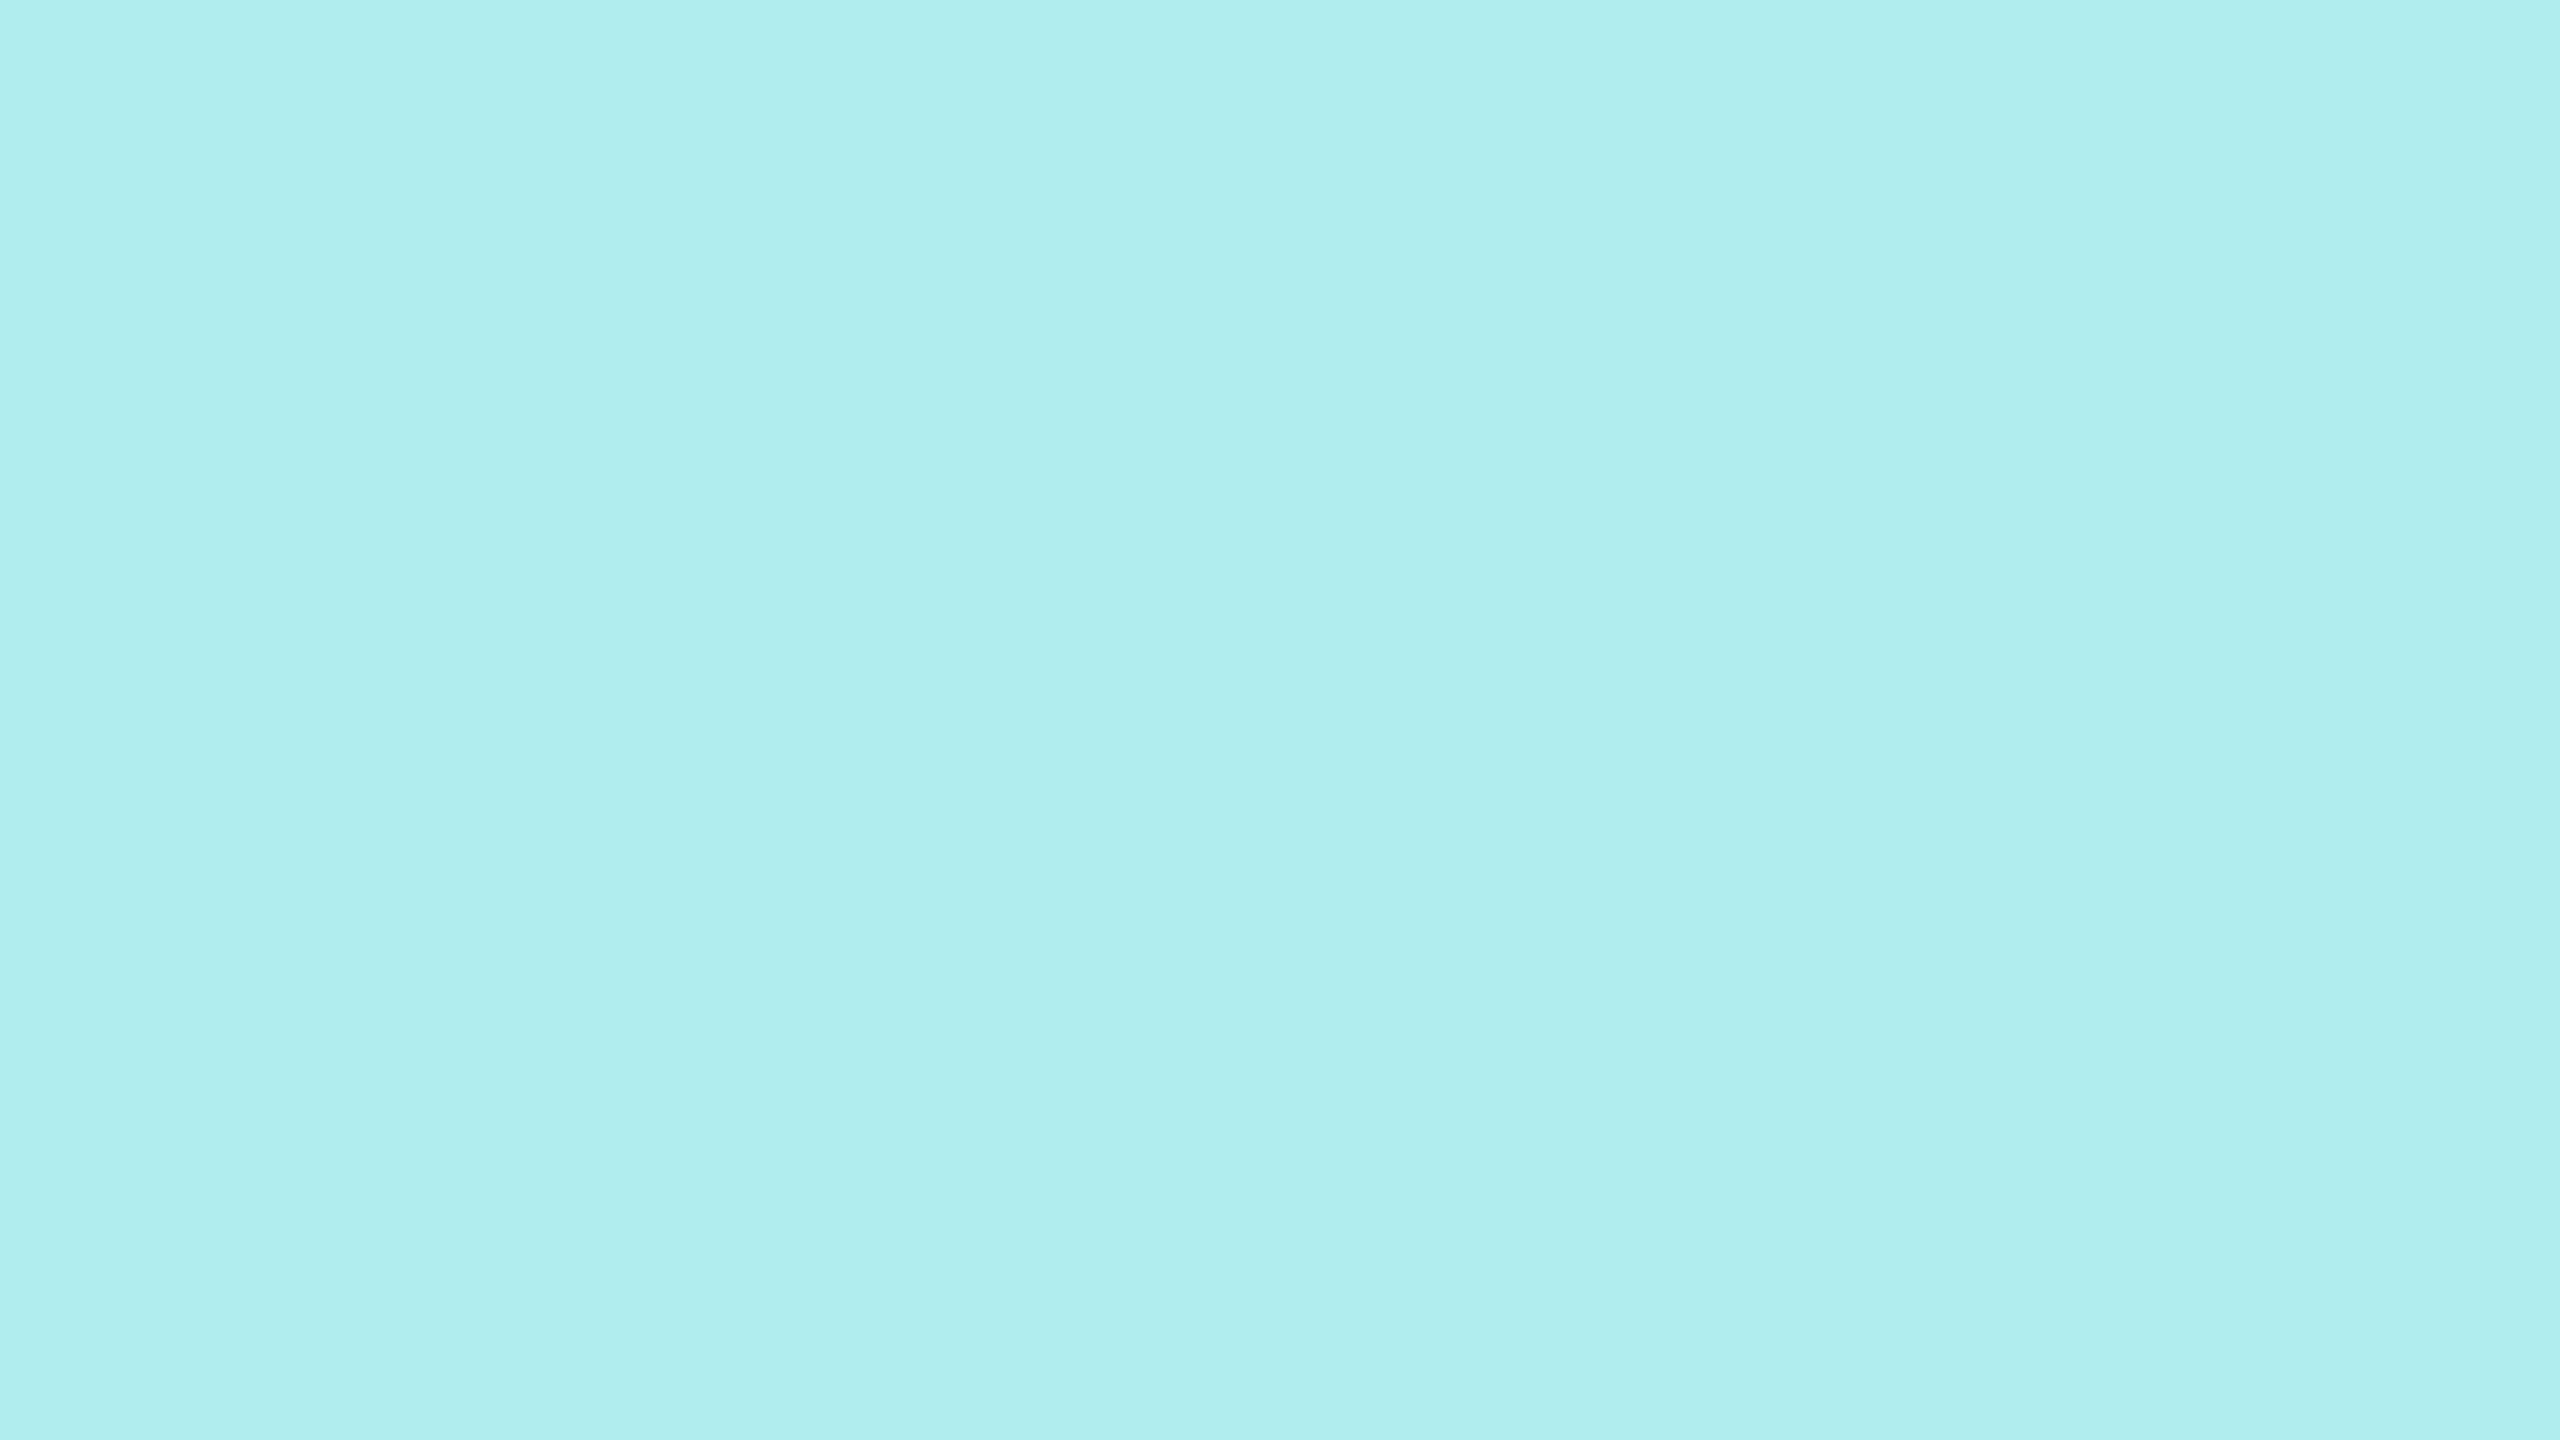 Free 2560x1440 resolution Pale Turquoise solid color background view